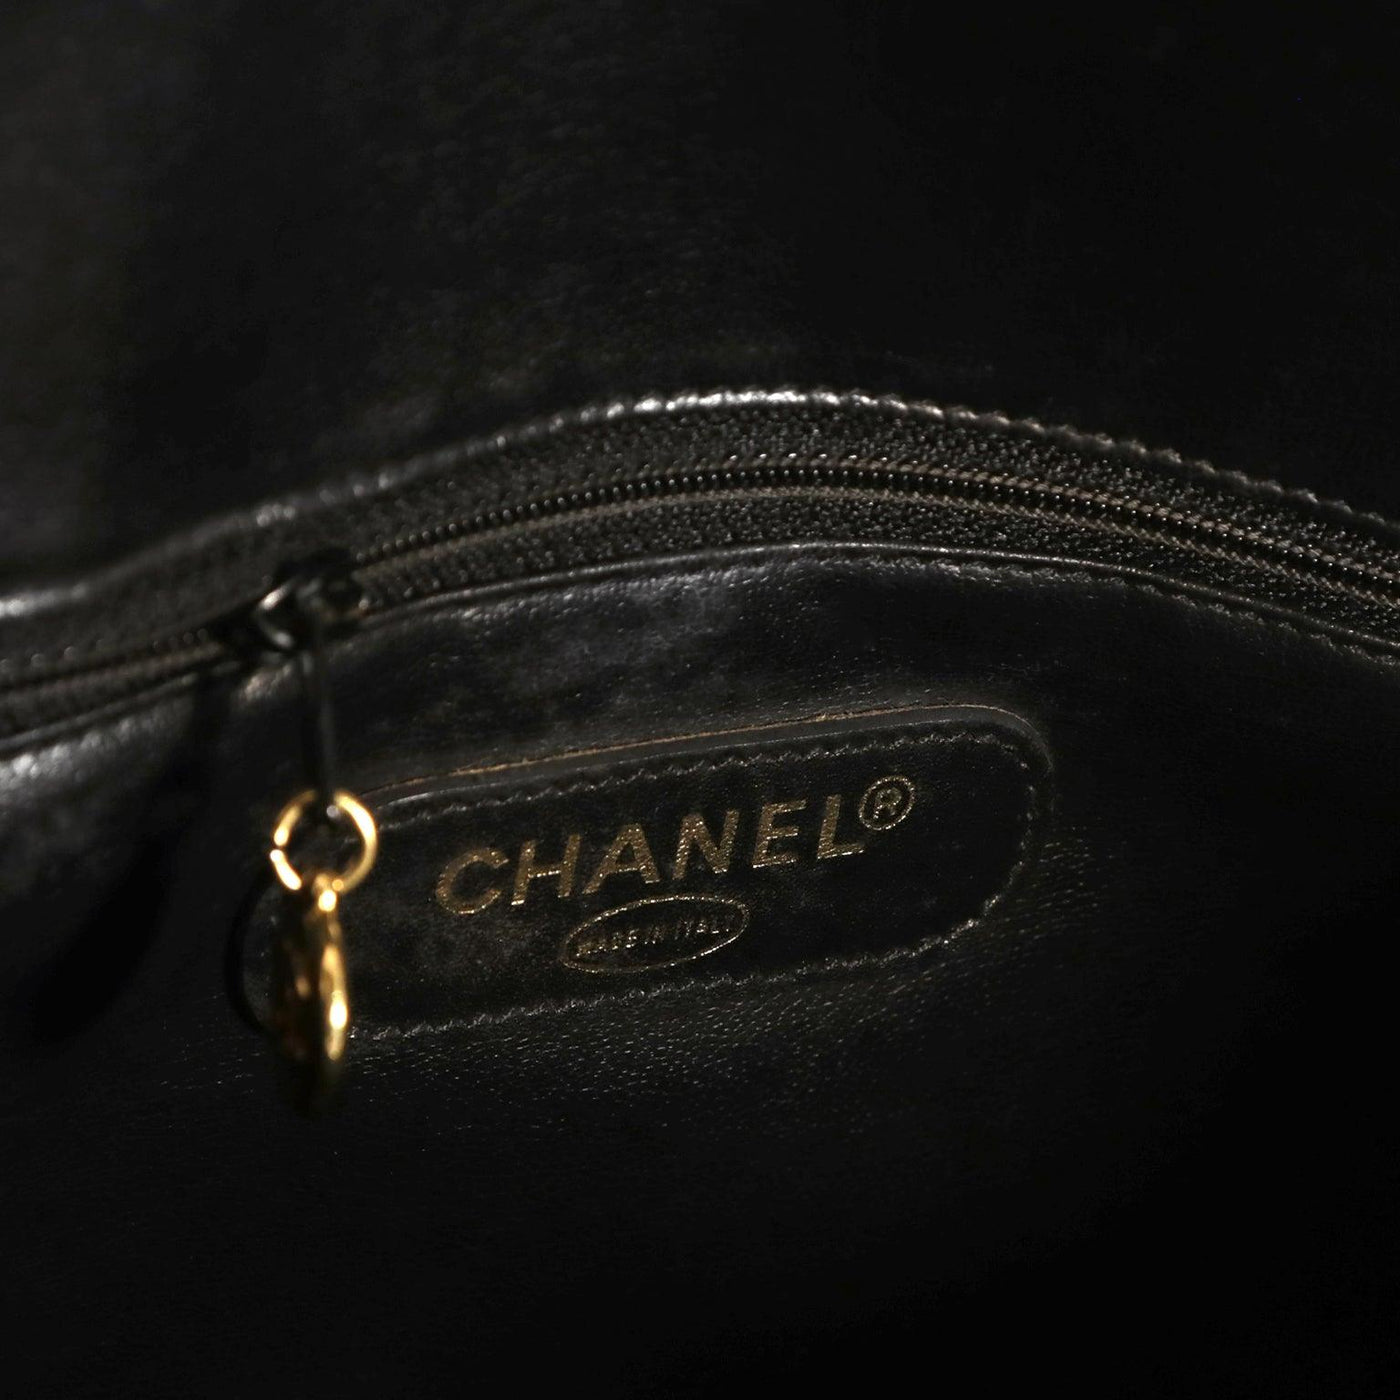 Chanel Black Leather Vintage Speedy Bag - Only Authentics